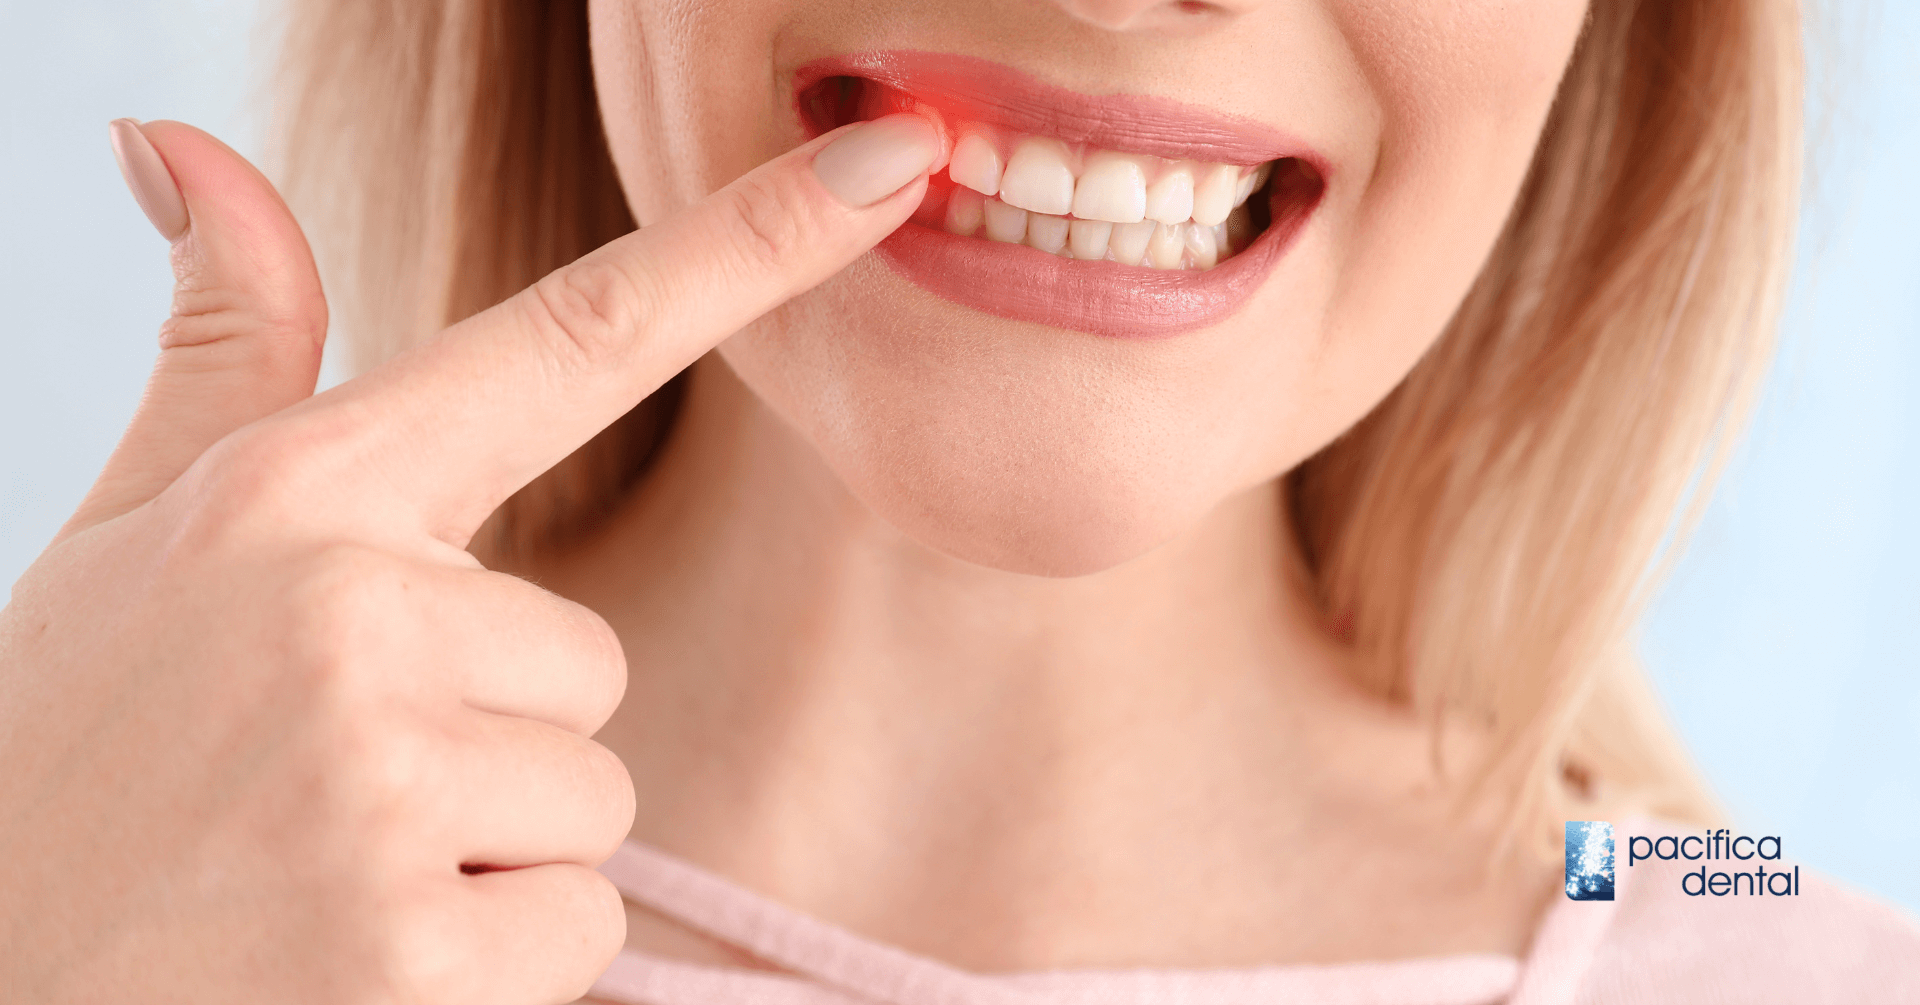 The Connection Between Acidic Diets and Tooth Erosion